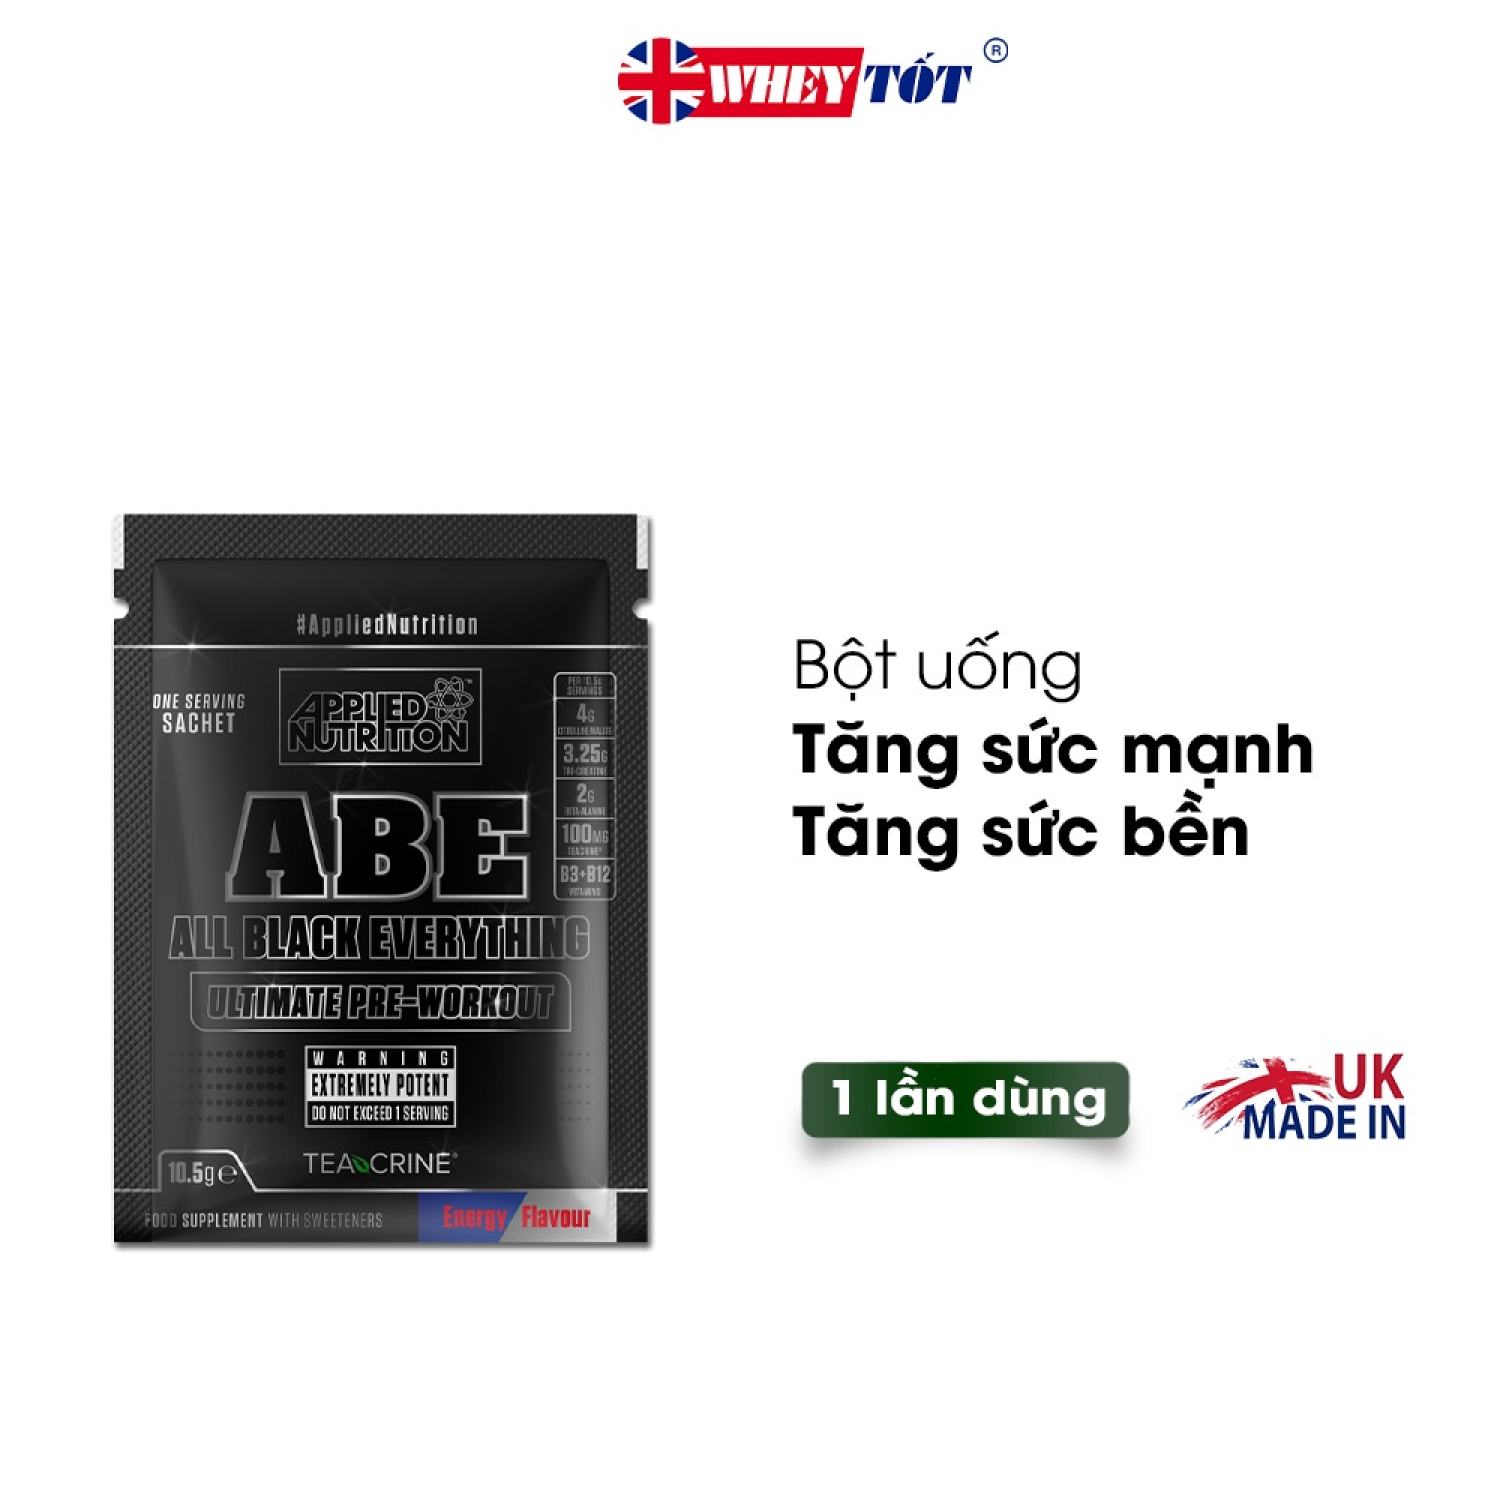 BỘT TĂNG LỰC APPLIED NUTRITION ABE PRE WORKOUT SAMPLE 1 LẦN DÙNG